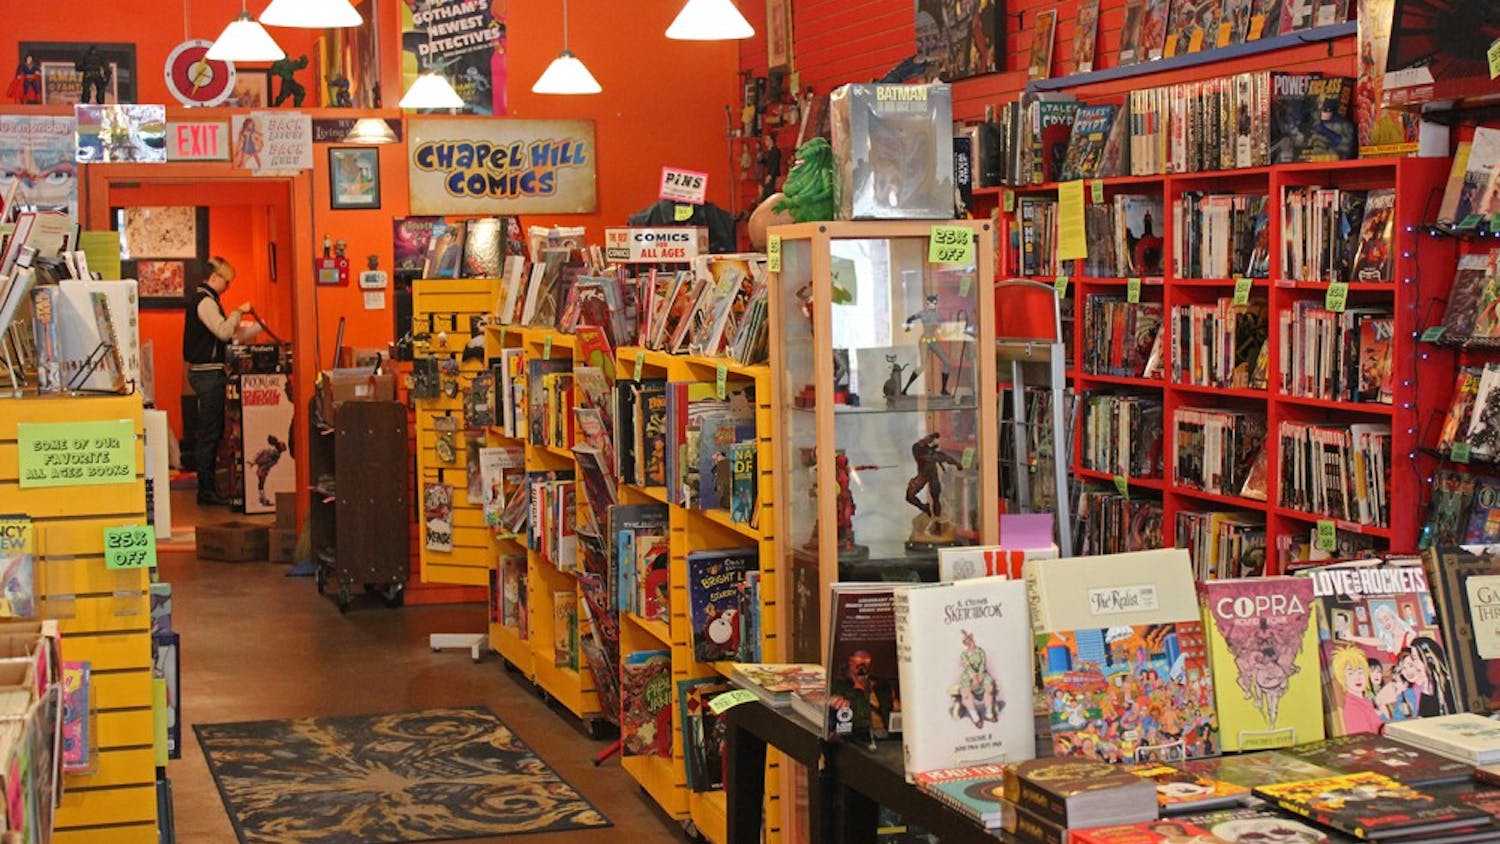 Chapel Hill Comics will be permanently closing its doors at the end of March